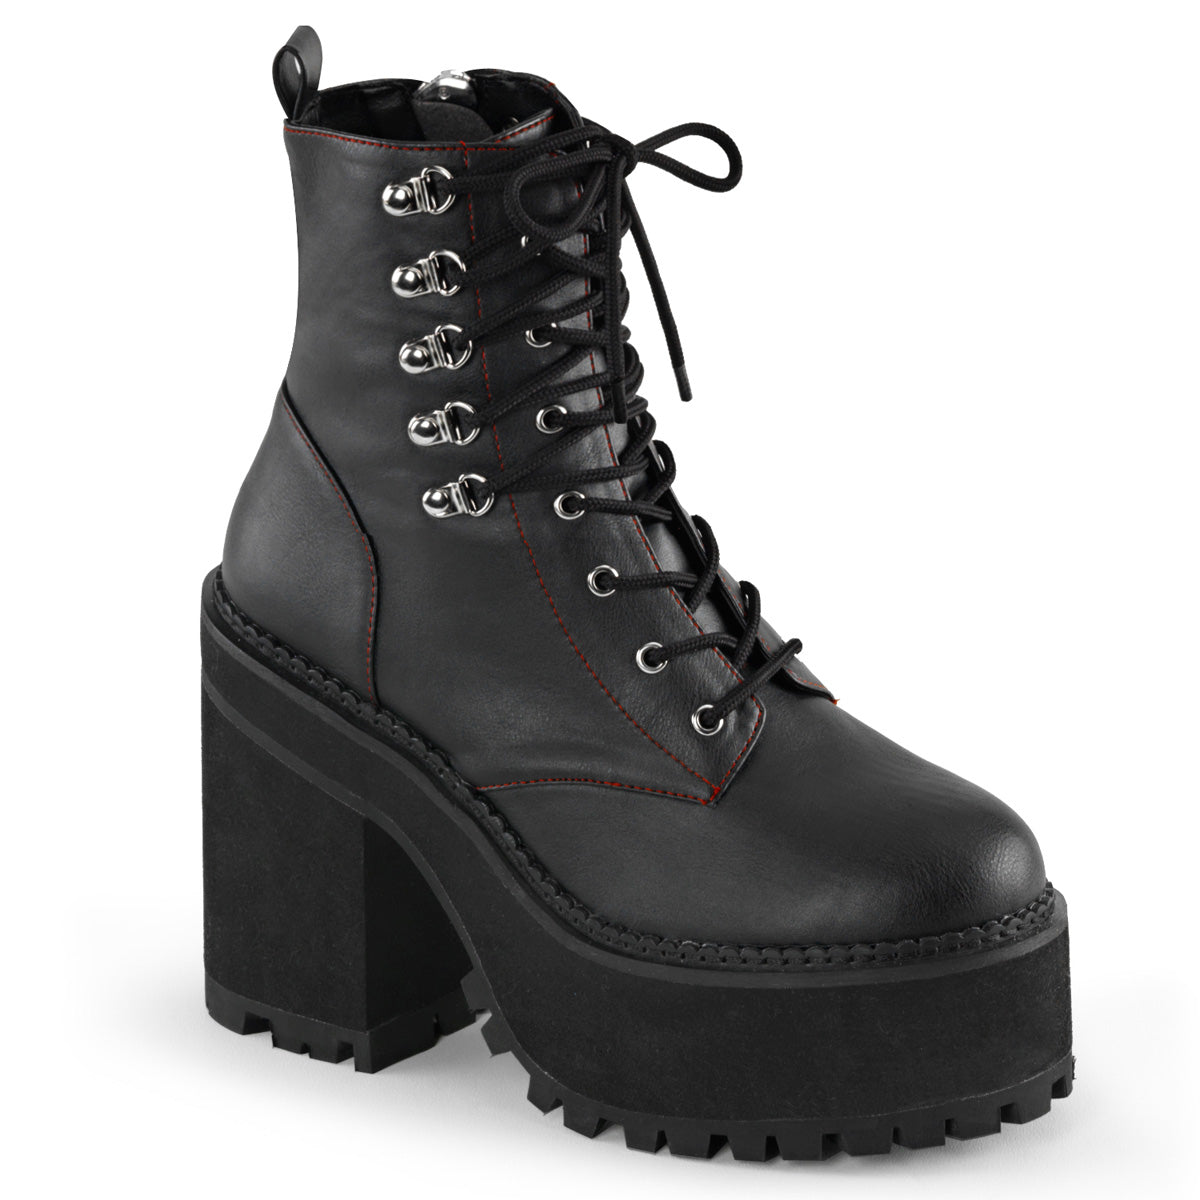 ASSAULT-100 Ankle Boots by Demonia